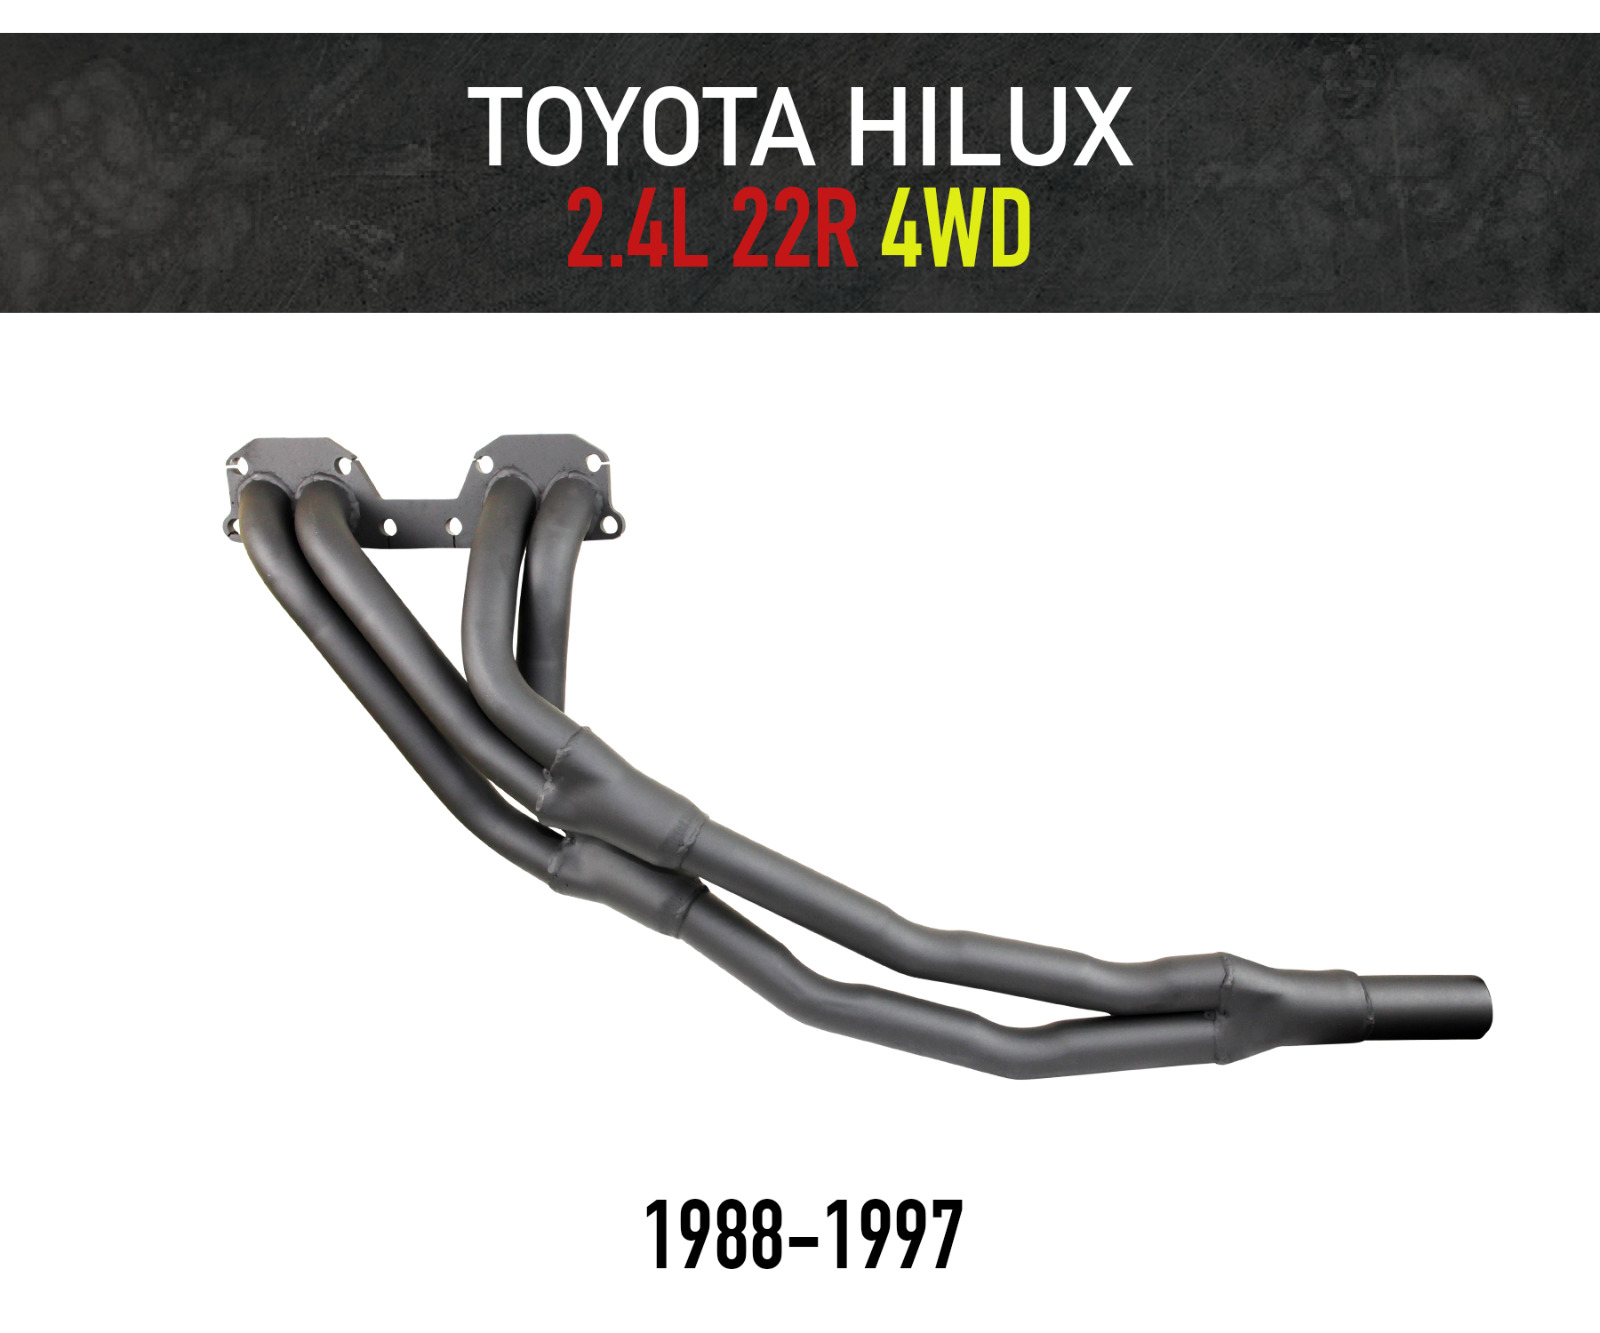 Headers / Extractors for Toyota Hilux 2.4L 22R (1988-1997) 4WD models